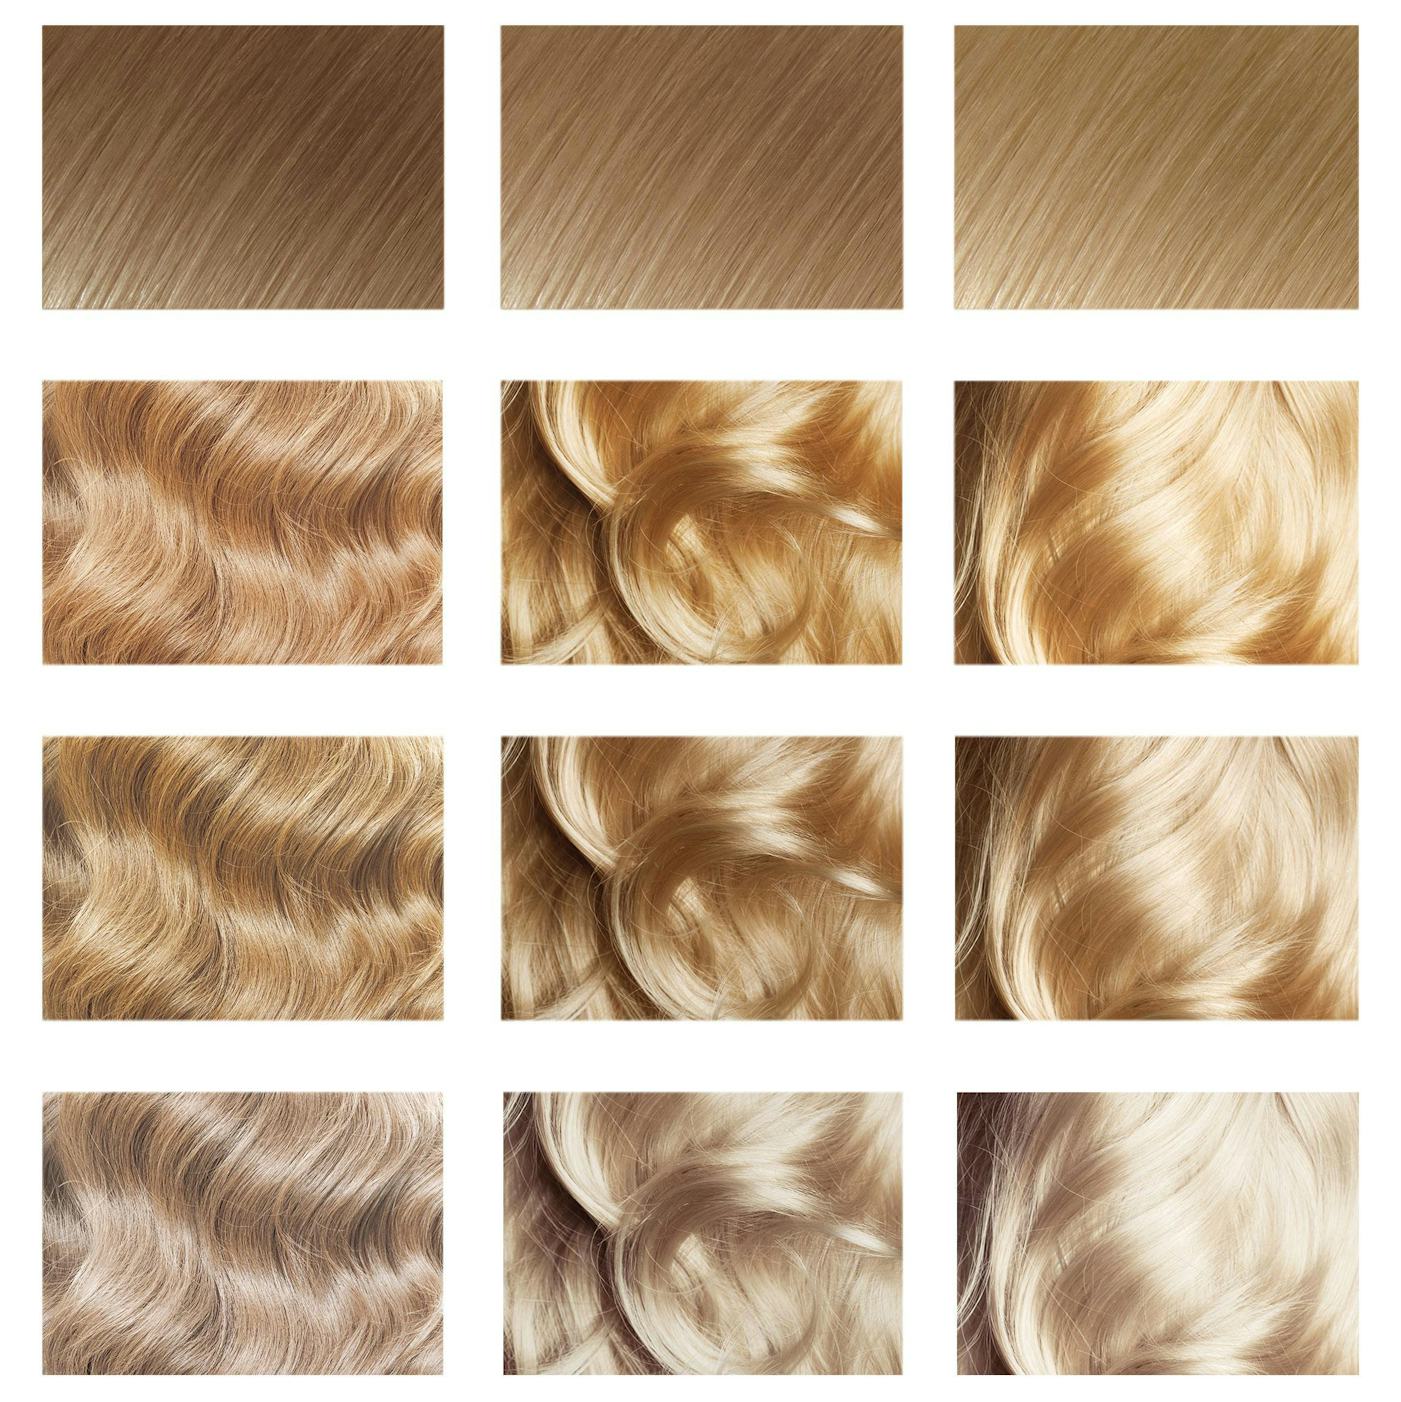 Ammonia Free High Lift Shades Lighten Hair Up To 3 Levels Without